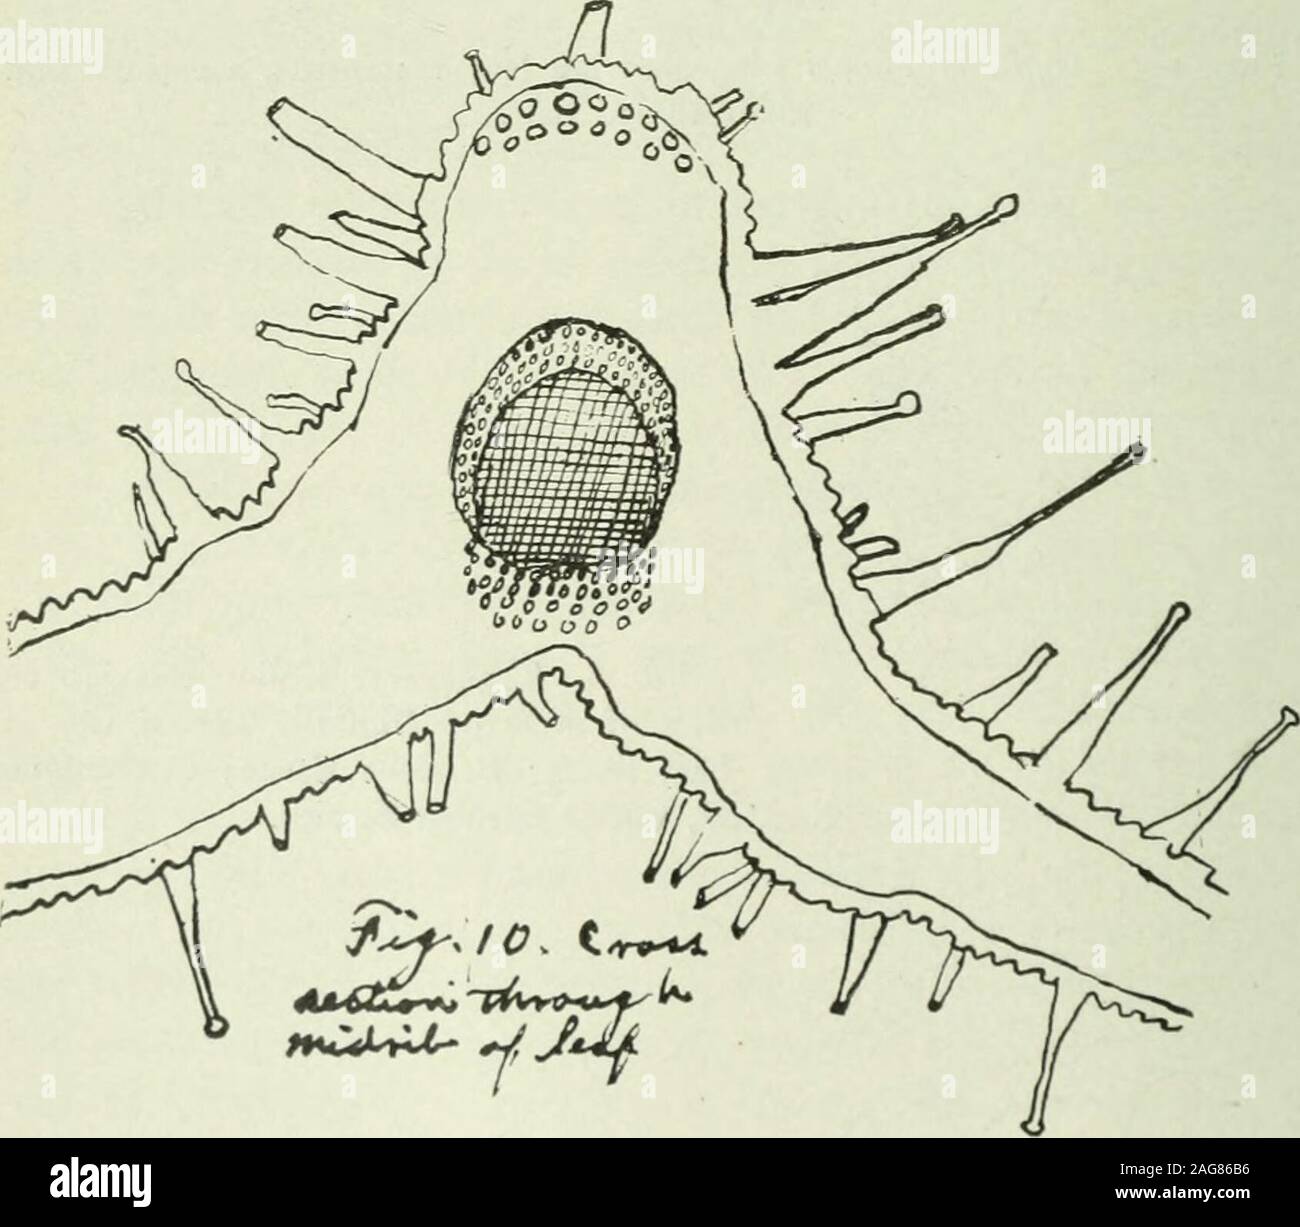 . American journal of pharmacy. Figs. 7-9. Digitalis Thapsi Lin., showing structure of stem and stomata on leaf.. Fig. 10. Cross-section through midrib of leaf of Digitalis Thapsi Lin. ^iprii; fgiT^ ^ Digitalis Thapsi Lin. 151 PHARMACOLOGIC ACTION. By Herbert C. Hamilton. A preliminary investigation of Digitalis Thapsi to determinewhether it possessed any of the therapeutic properties of the officialdrug was carried out on frogs by the M. L. D. method for stand-ardization.^ The drug in tincture form was properly diluted andinjected into frogs in gradually decreasing doses until the minimumwas Stock Photo